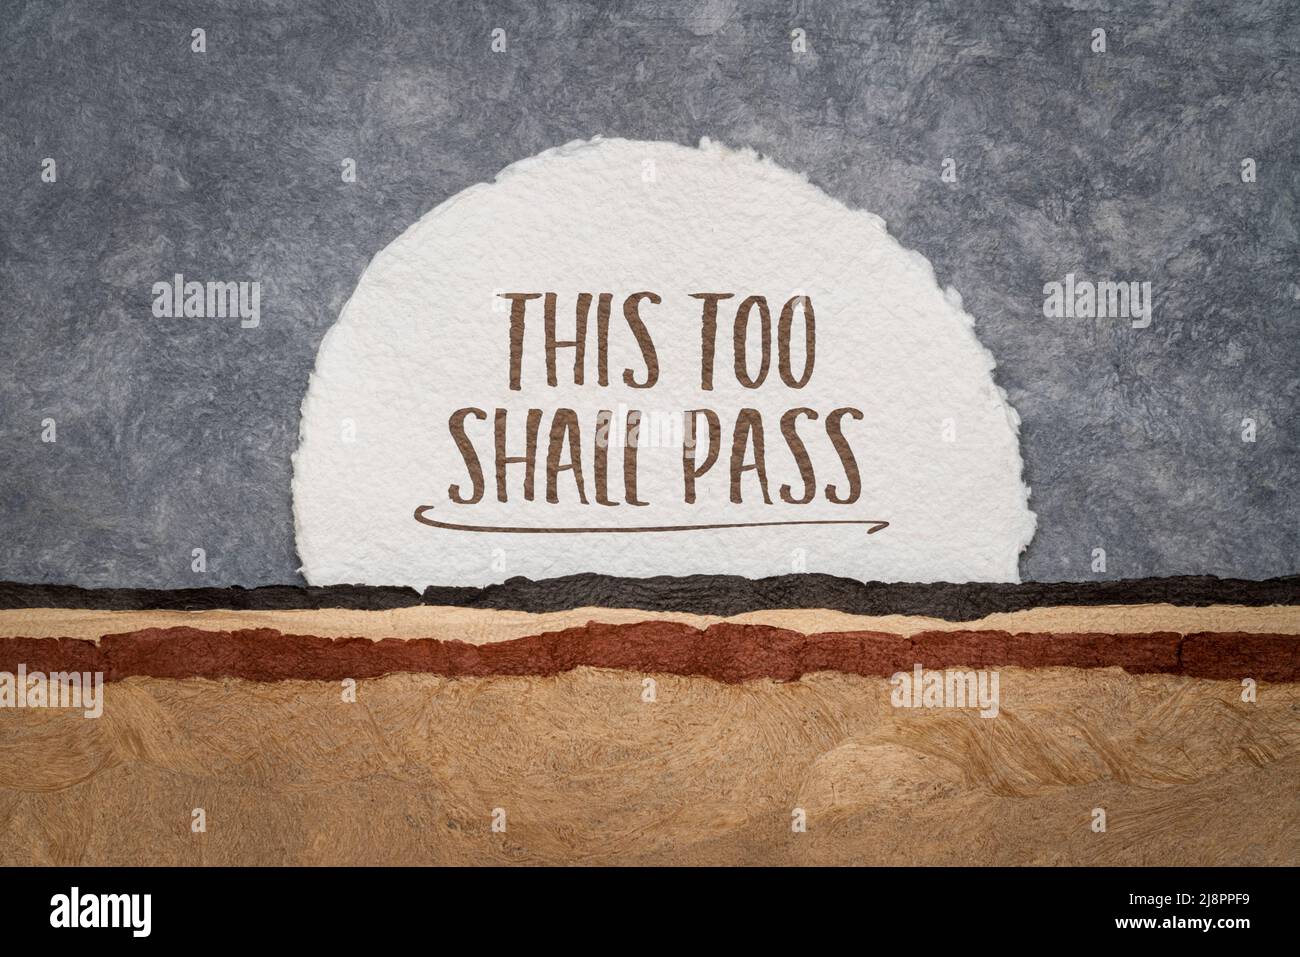 this too shall pass - inspirational handwriting on a handmade abstract paper landscape, positivity, hope, temporary nature, or ephemerality of the hum Stock Photo